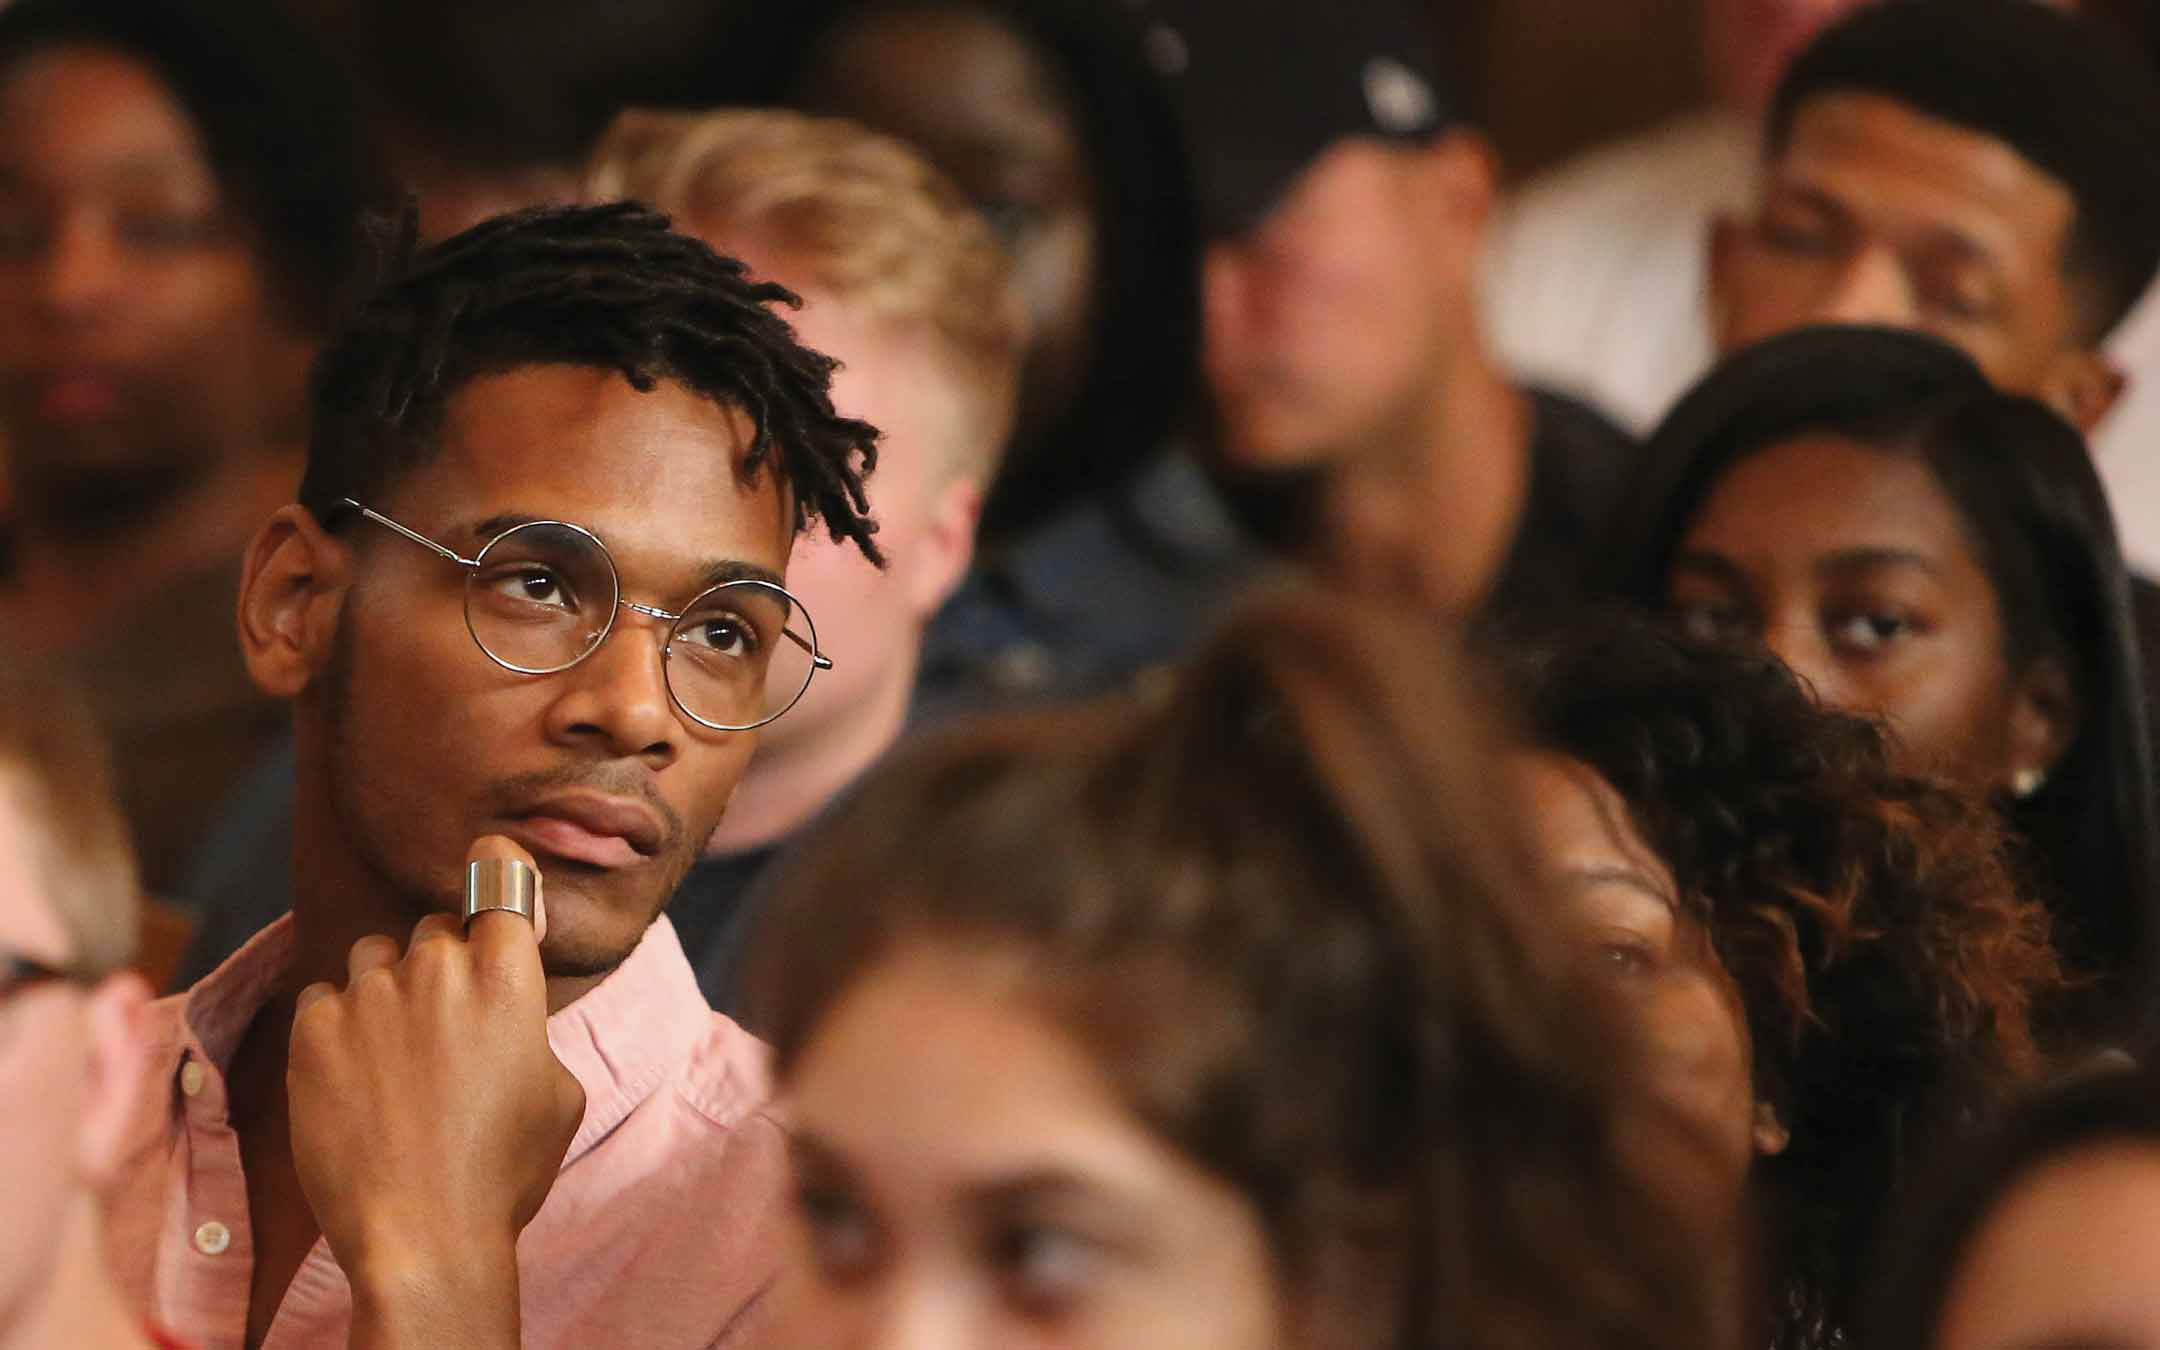 Student looking pensive while sitting in the audience listening to a panel at the 2018 American Dream Reconsidered Conference.